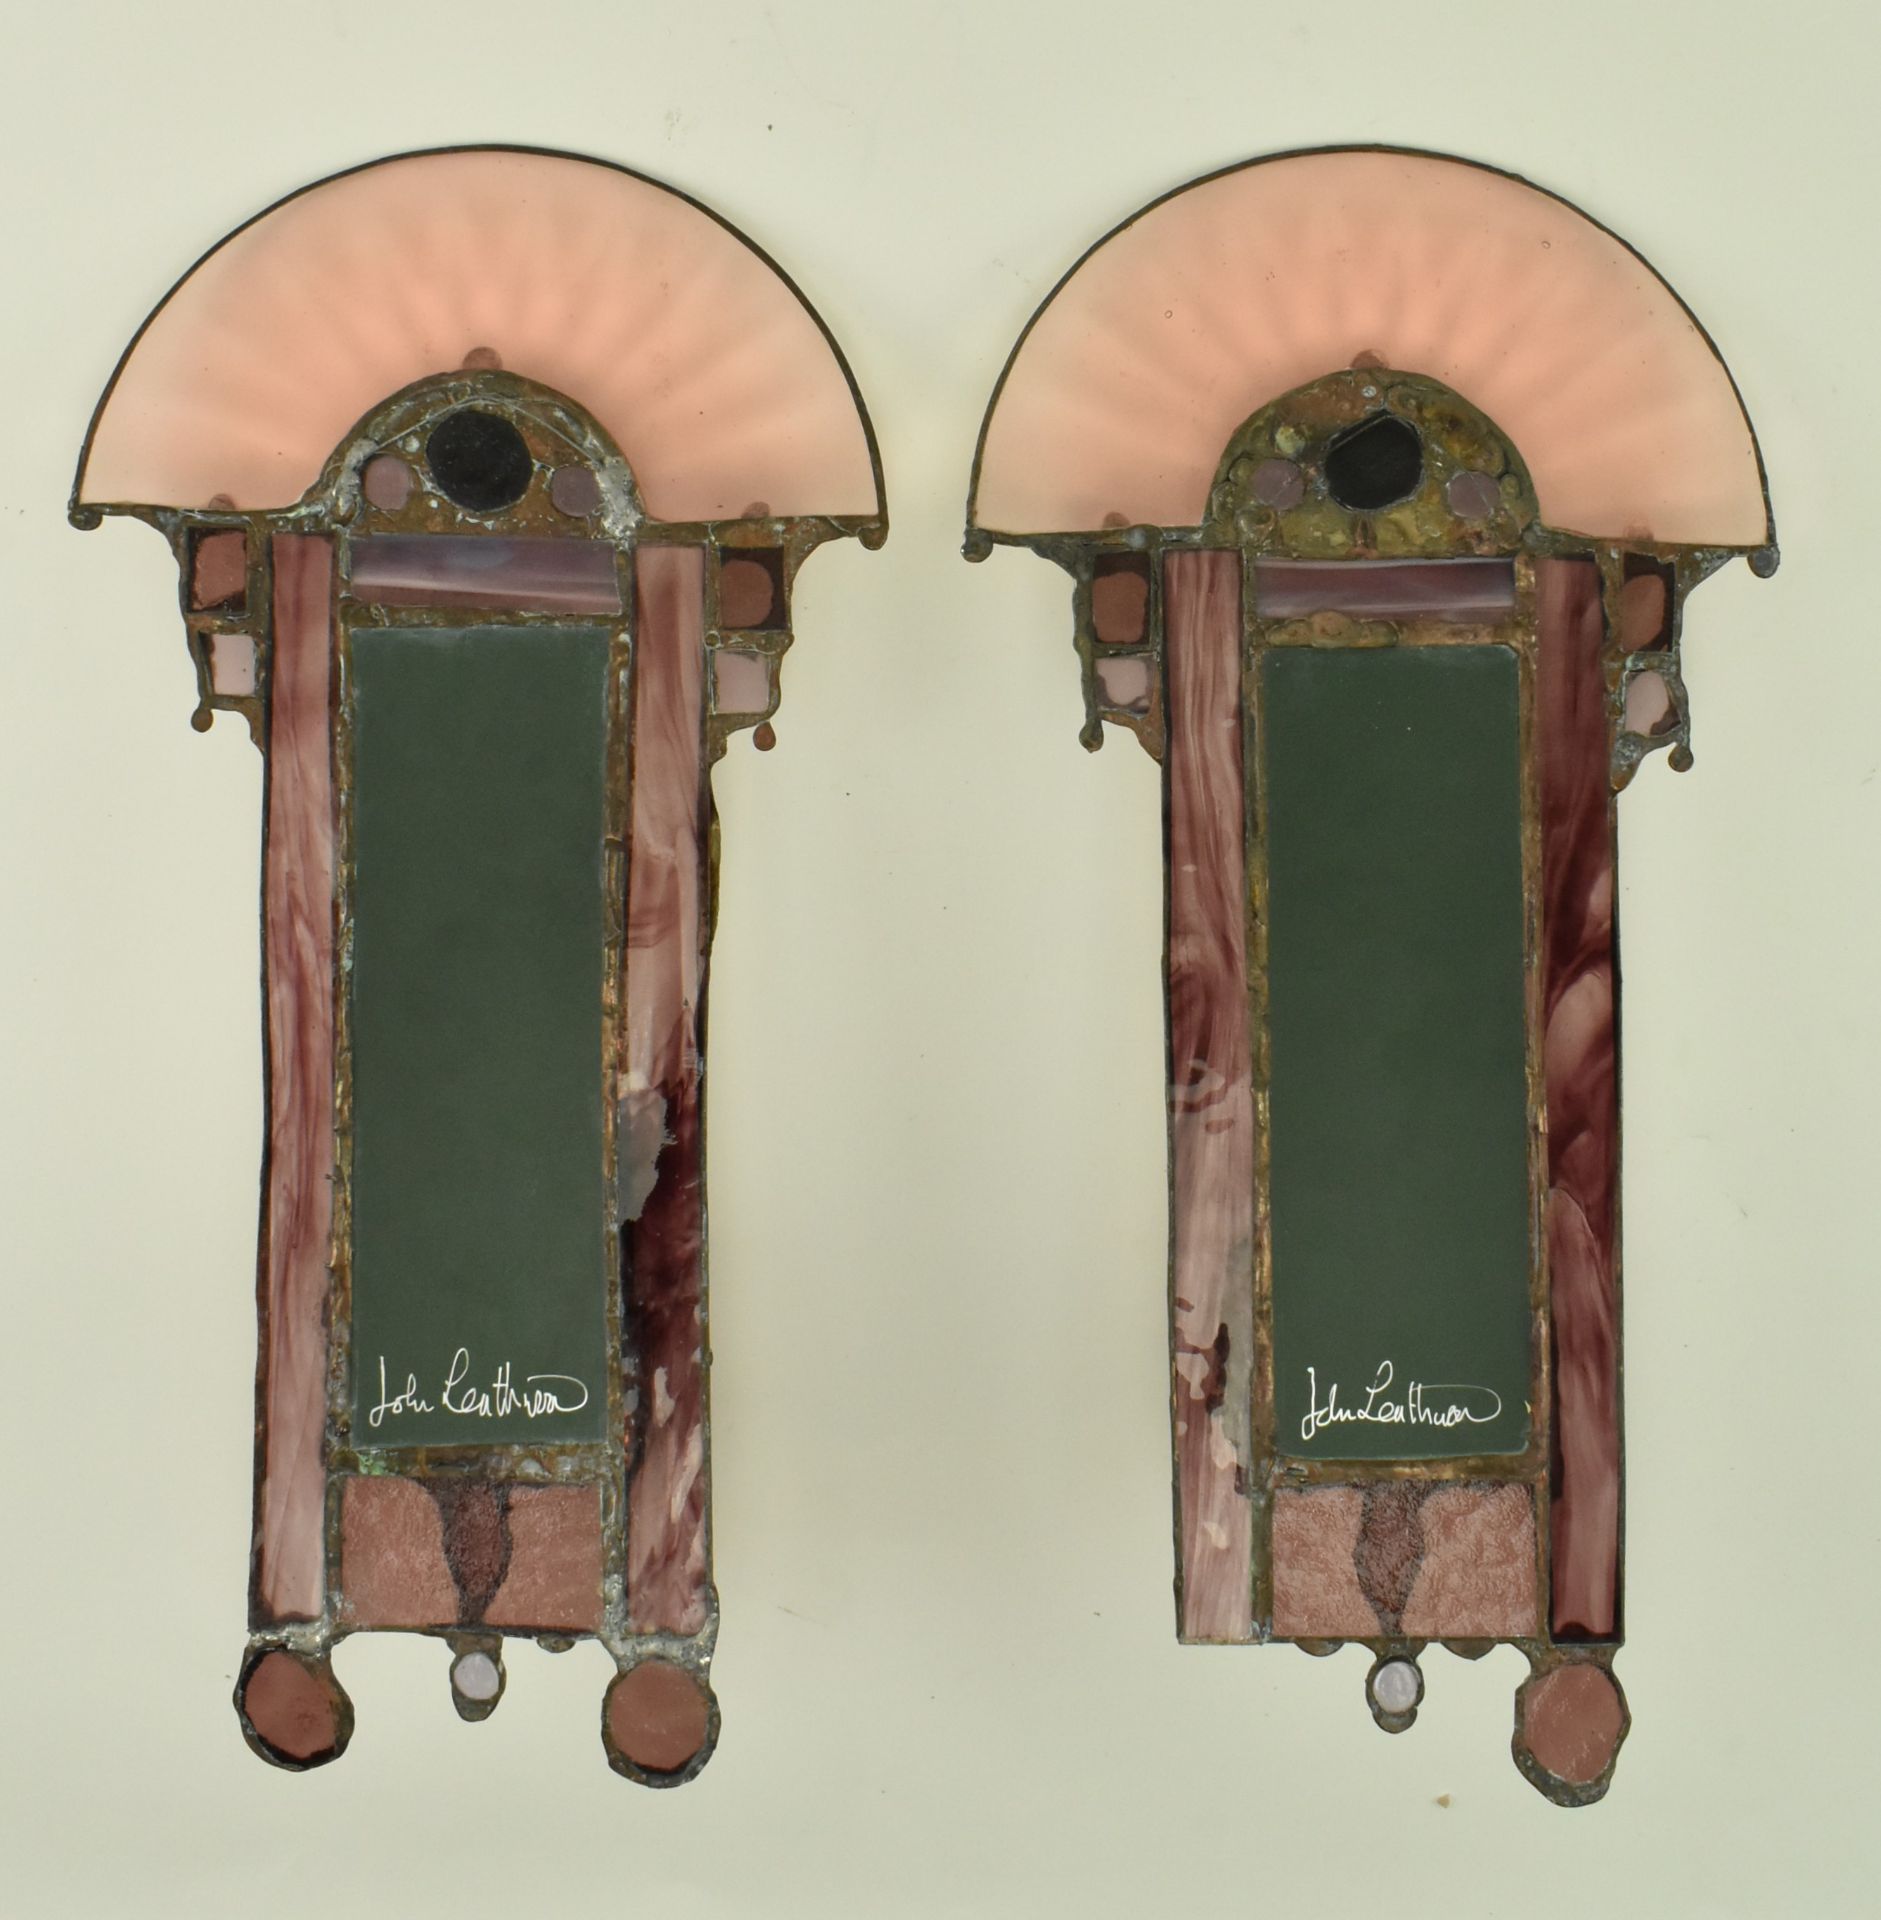 JOHN LEATHWOOD - PAIR OF STAINED LEADED GLASS WALL SCONCES - Image 6 of 8